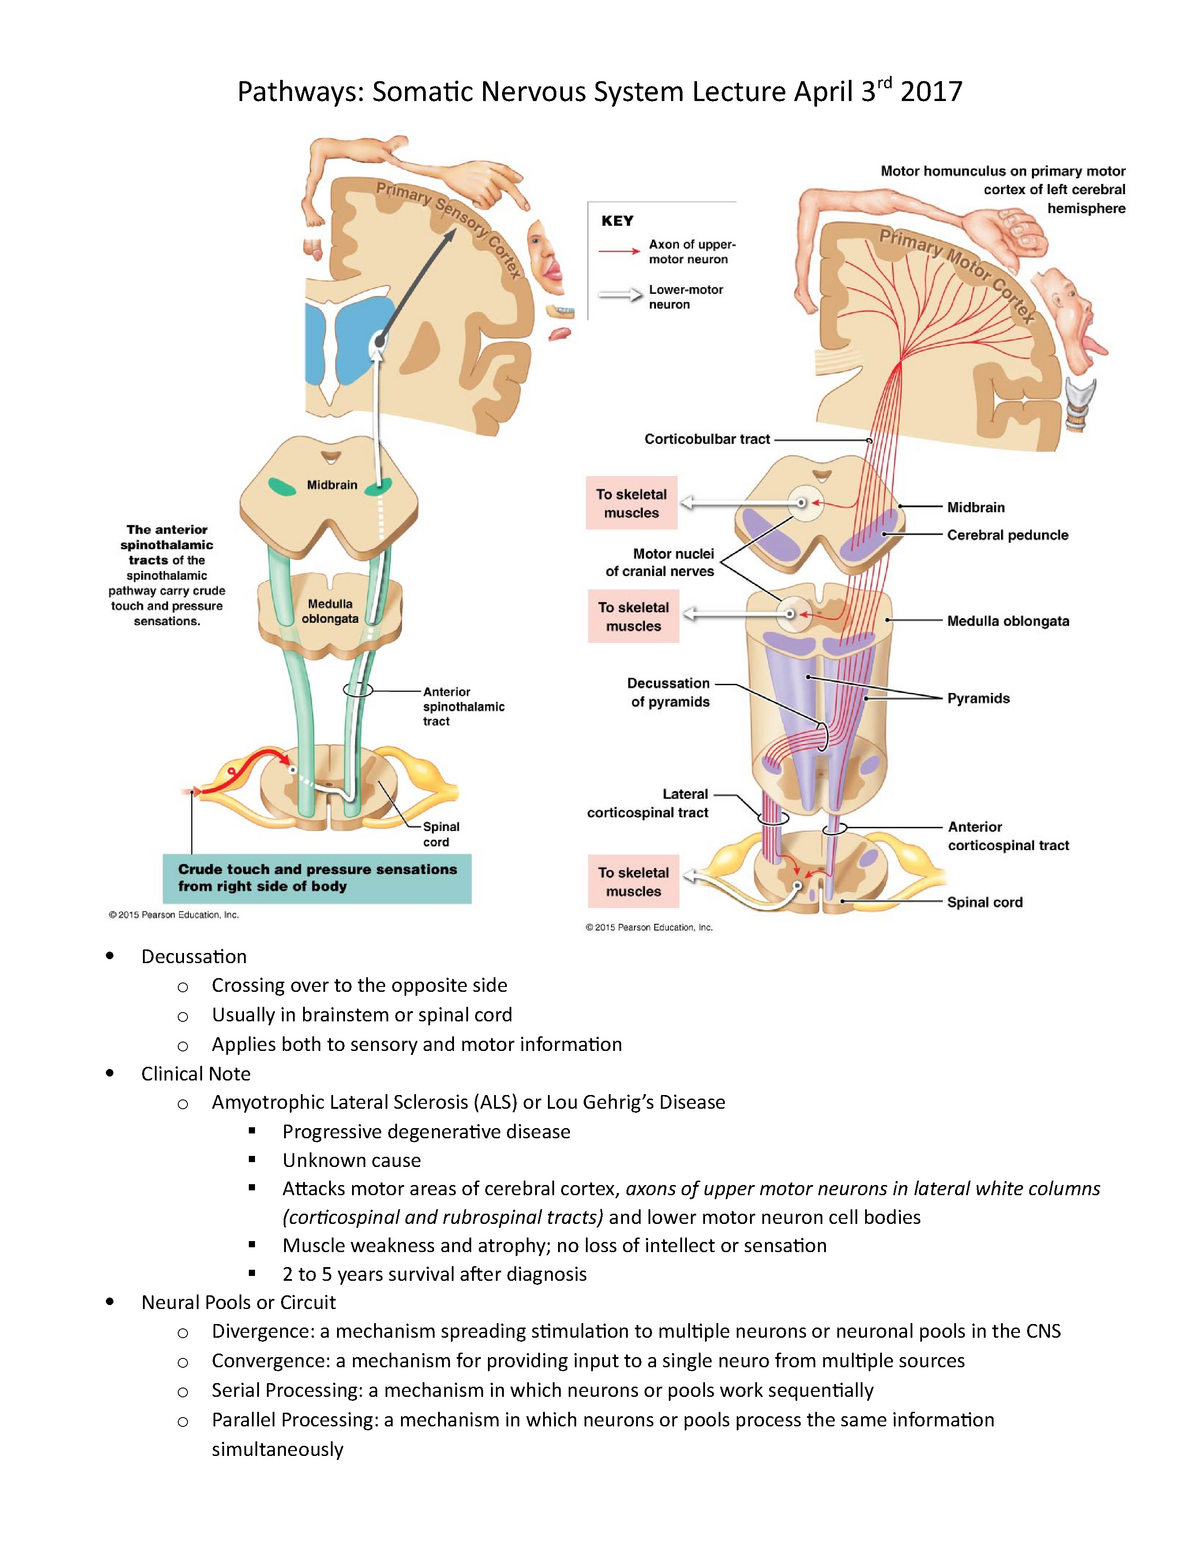 function of somatic nervous system